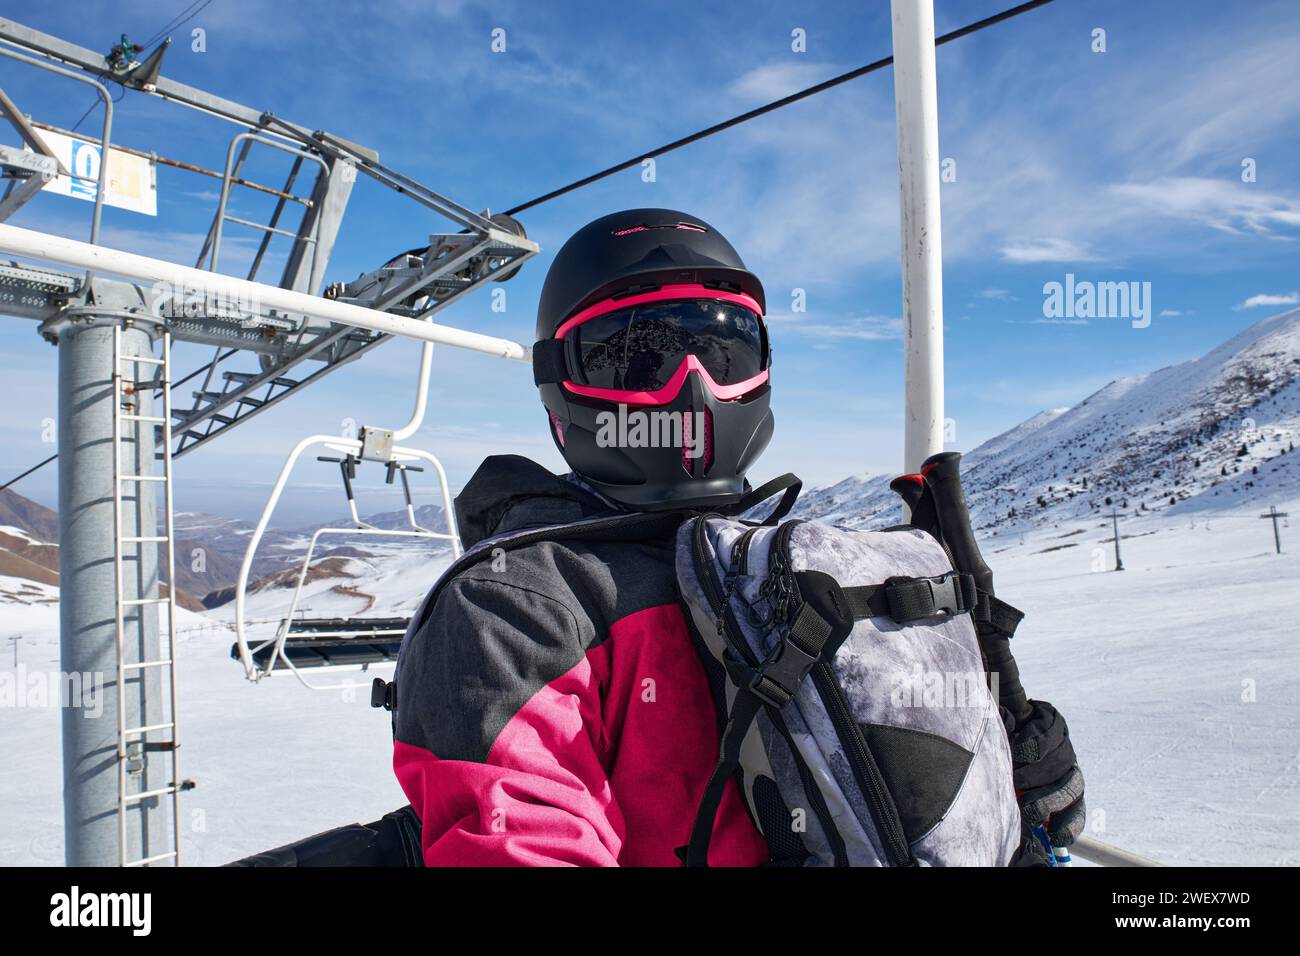 Man goes up ski lift. Person in snowboard equipment: stylish full face snow helmet black and pink color with goggles, backpack. Cable car construction Stock Photo